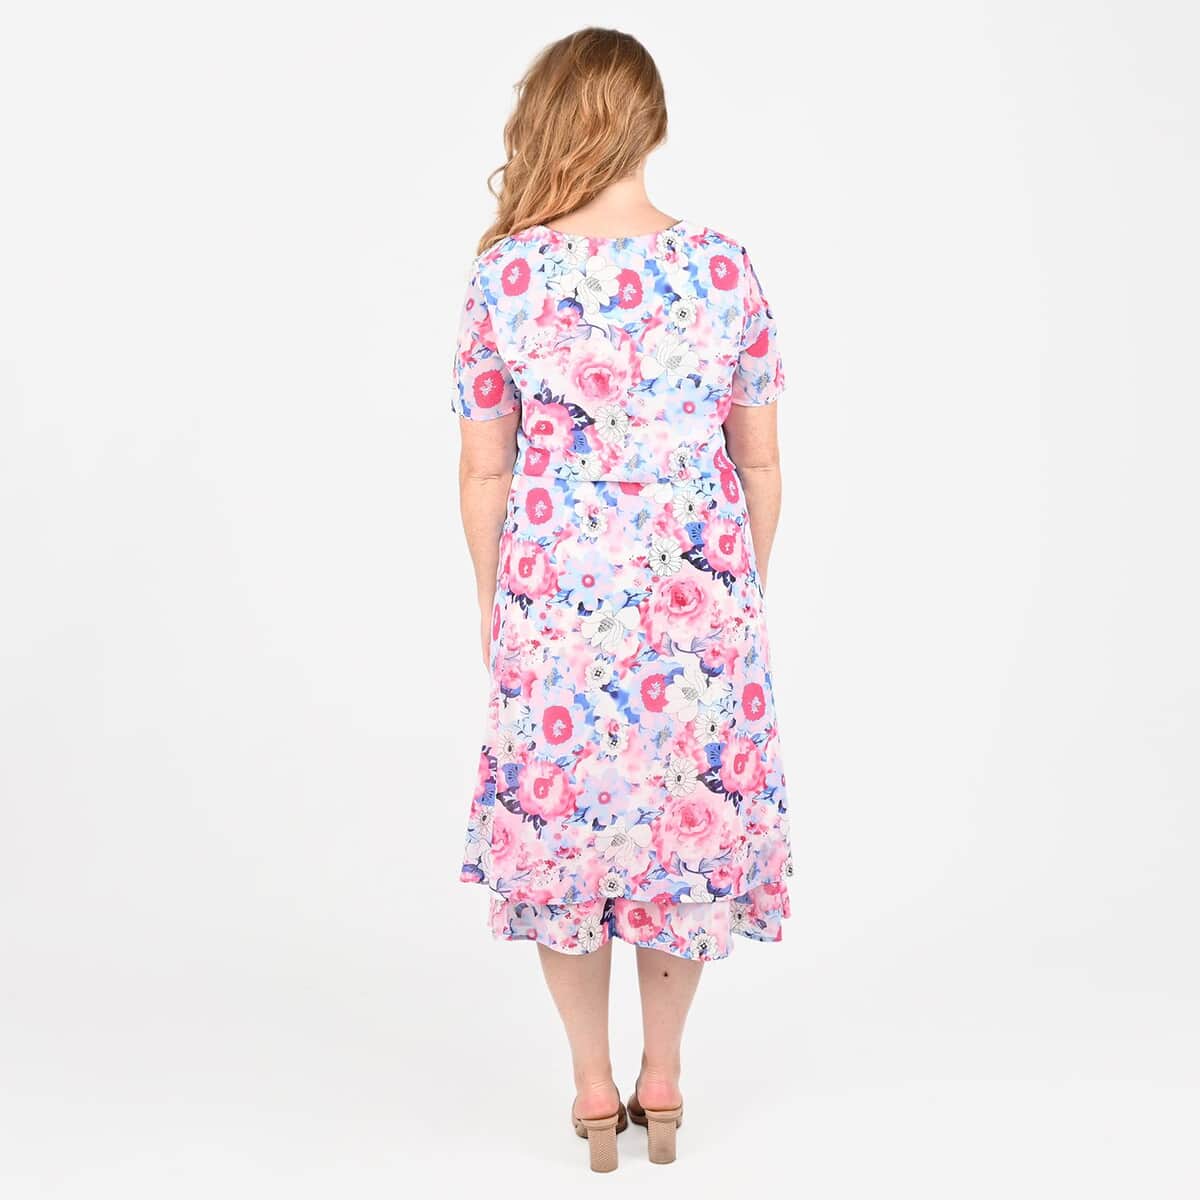 Tamsy Pink Floral 2-piece Chiffon Skirt Set - 1X image number 1